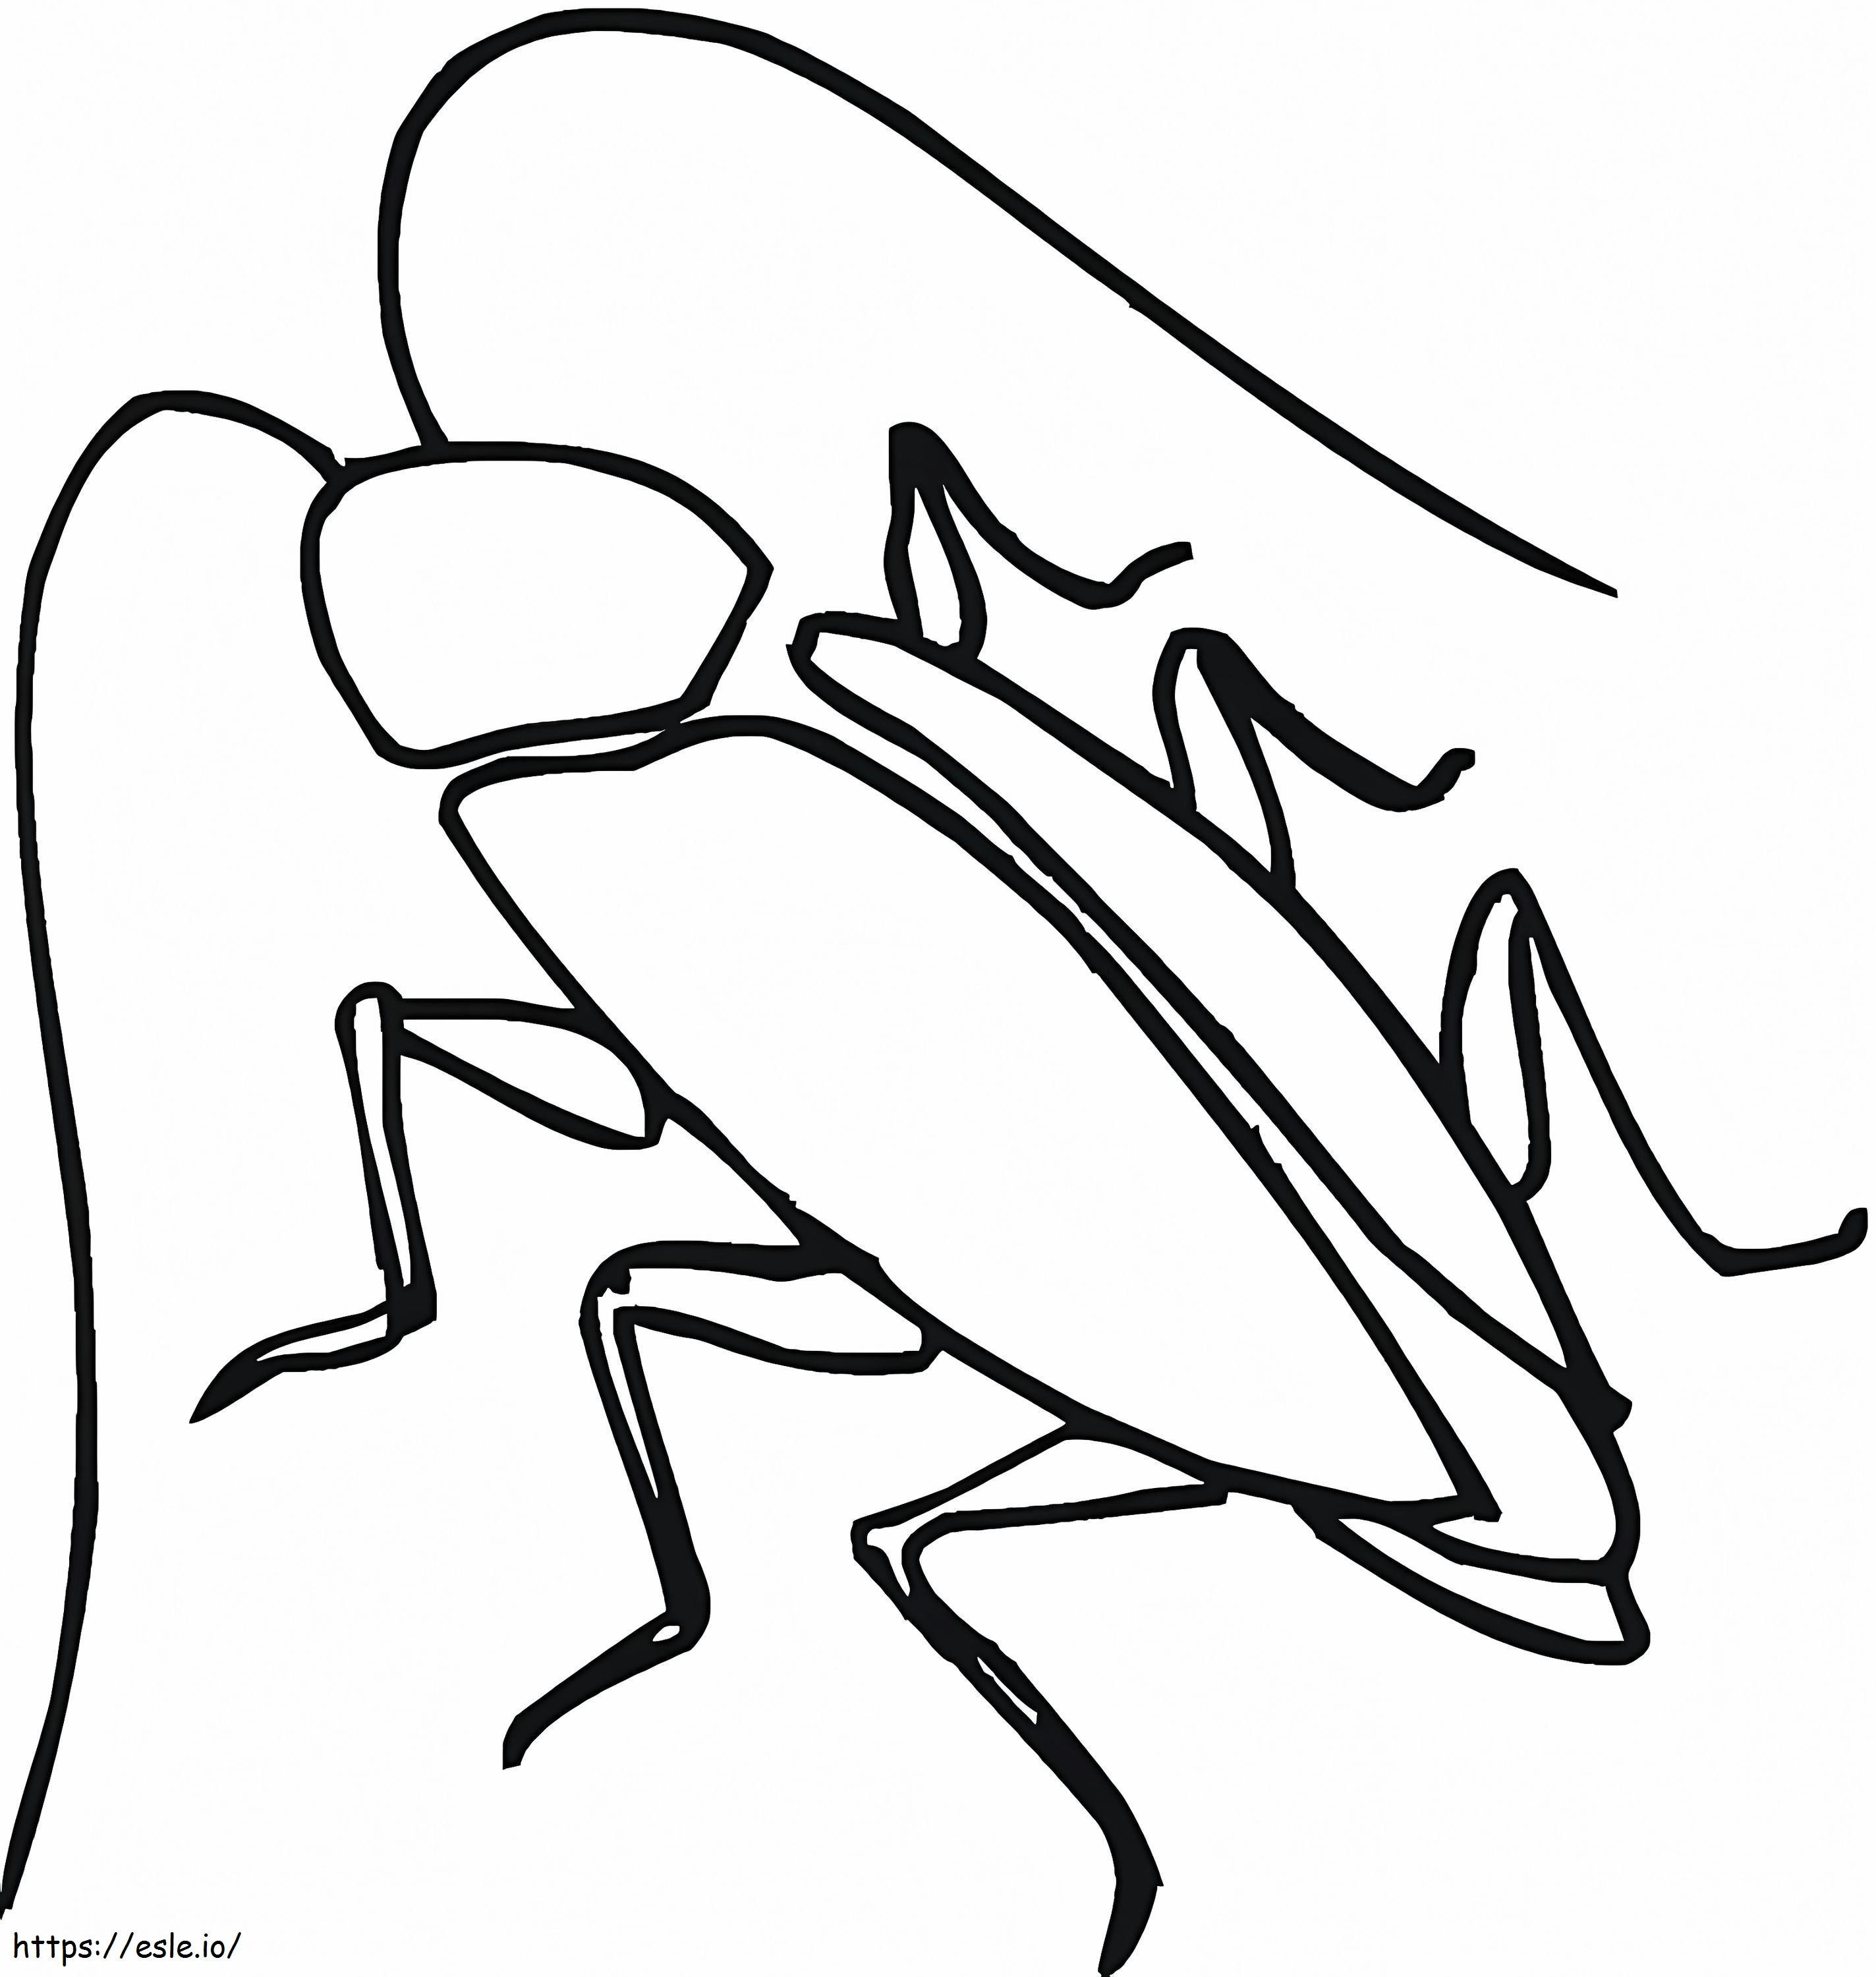 Simple Cockroach coloring page